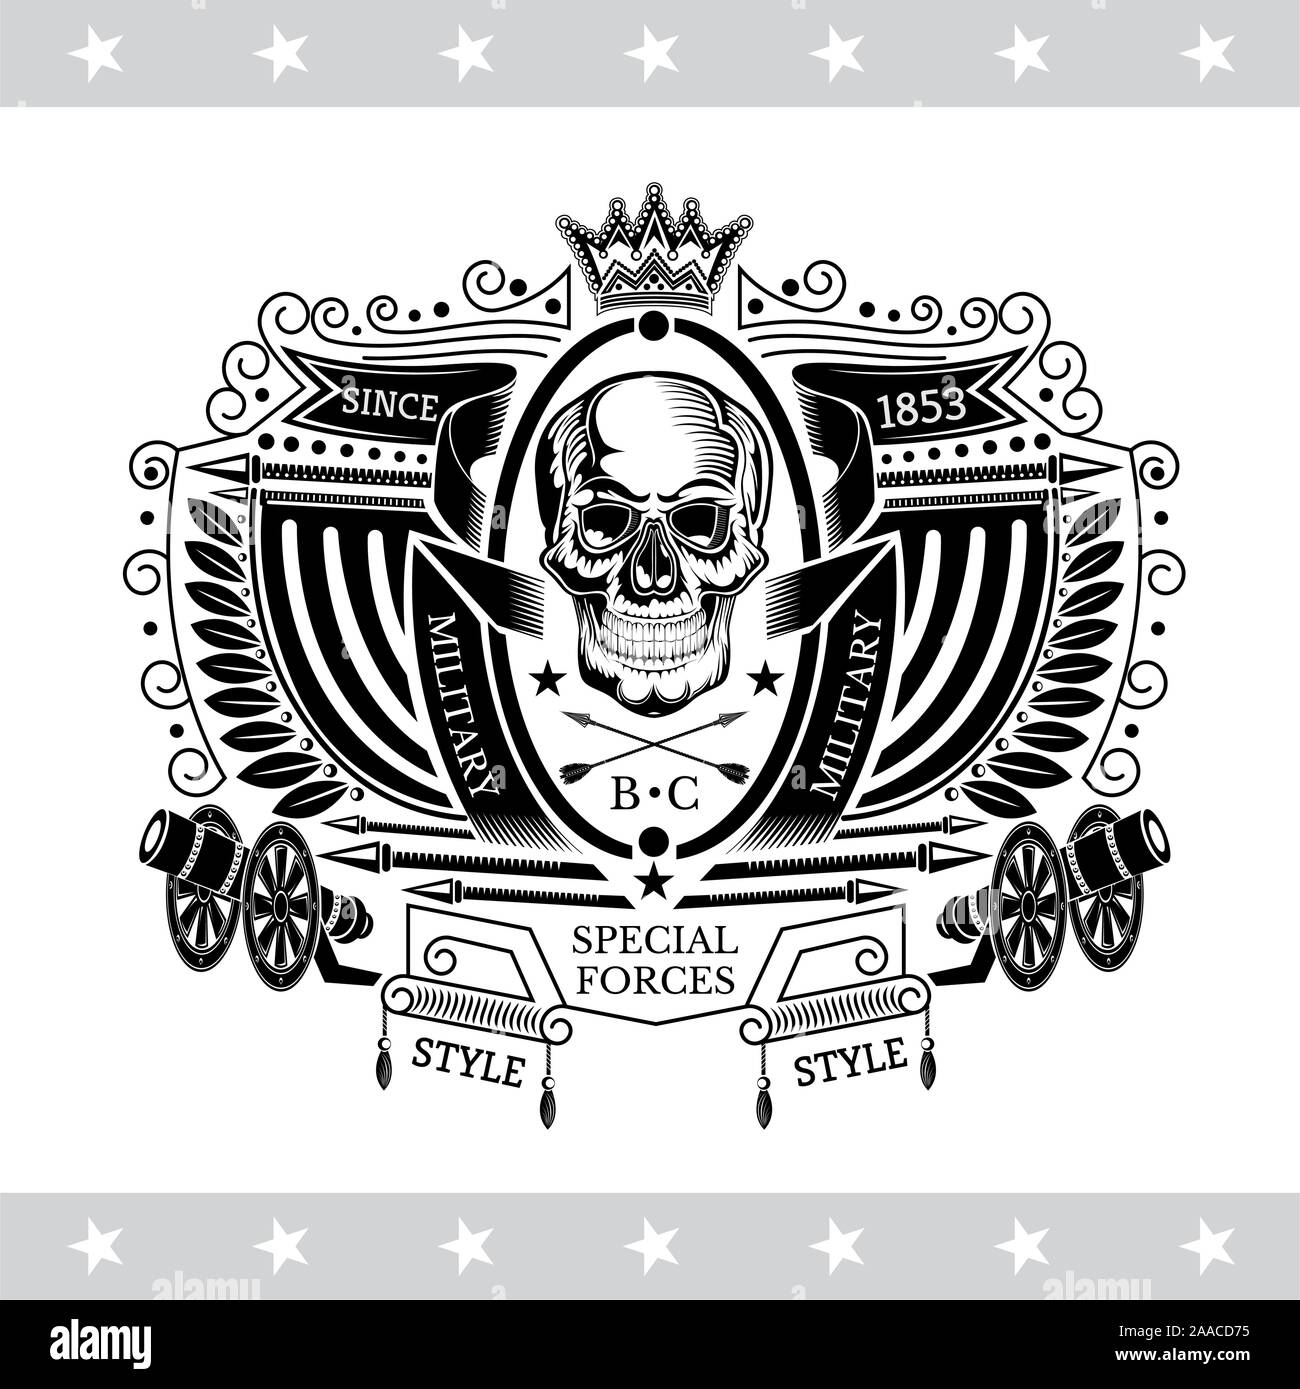 Skull front view in center oval frame between flags, cannon and ribbons. Vintage label isolated on white Stock Vector